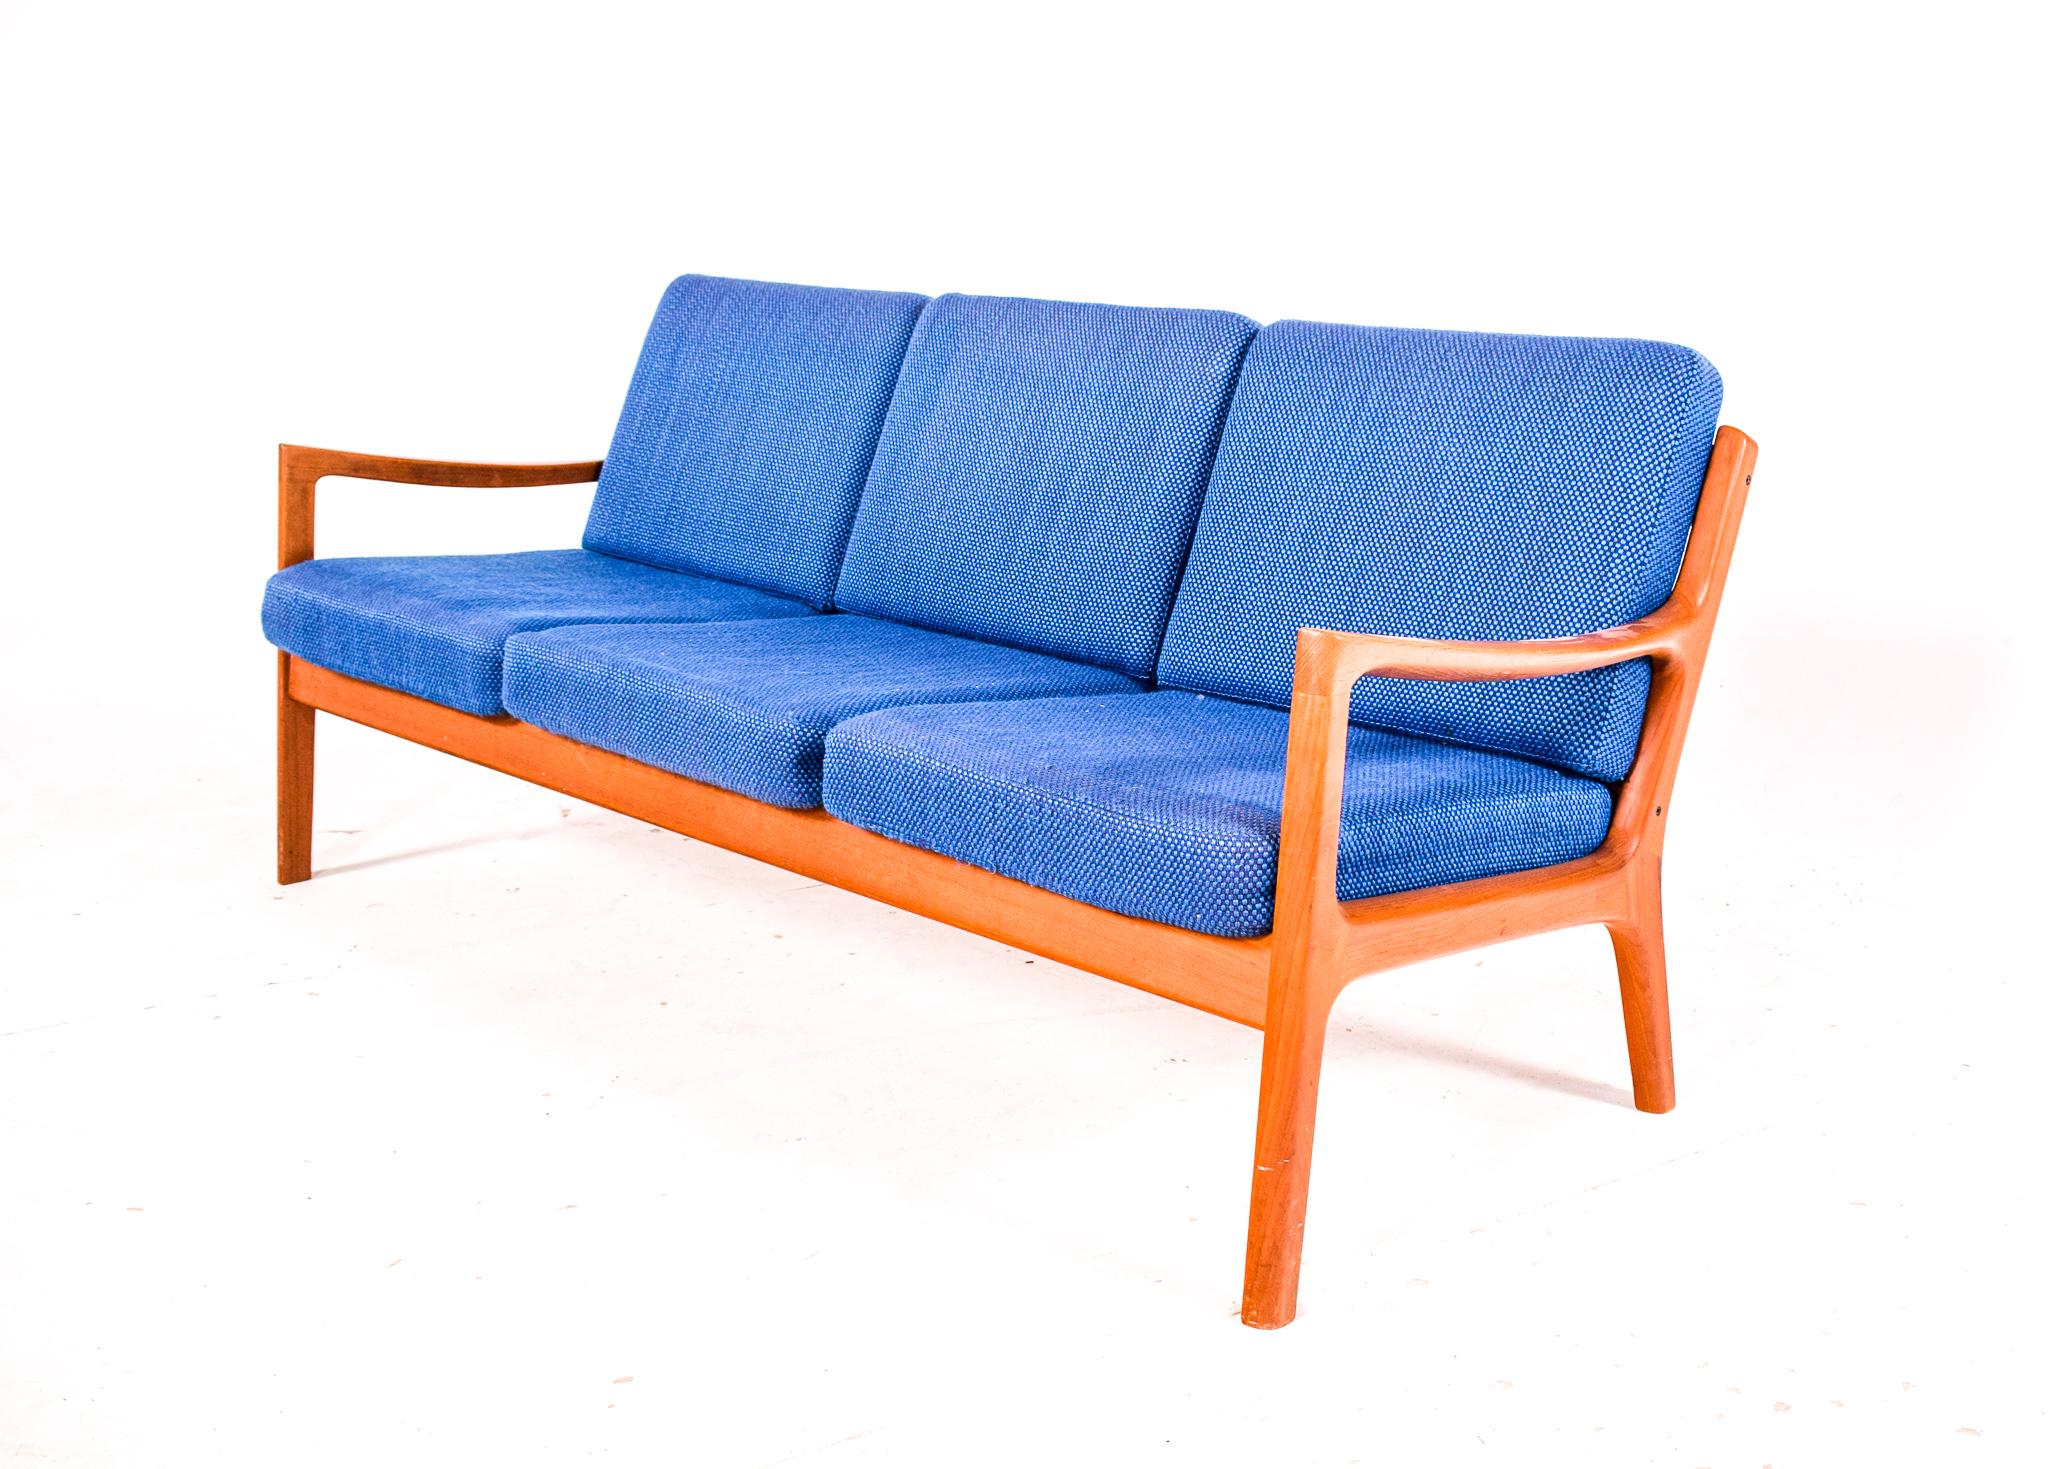 This three-seater 'Senator 166' sofa, designed by Ole Wanscher for France & Søn in the 1960s, is a paragon of Scandinavian mid-century design. The piece showcases the clean lines, quality materials, and the elegant simplicity that is hallmark to